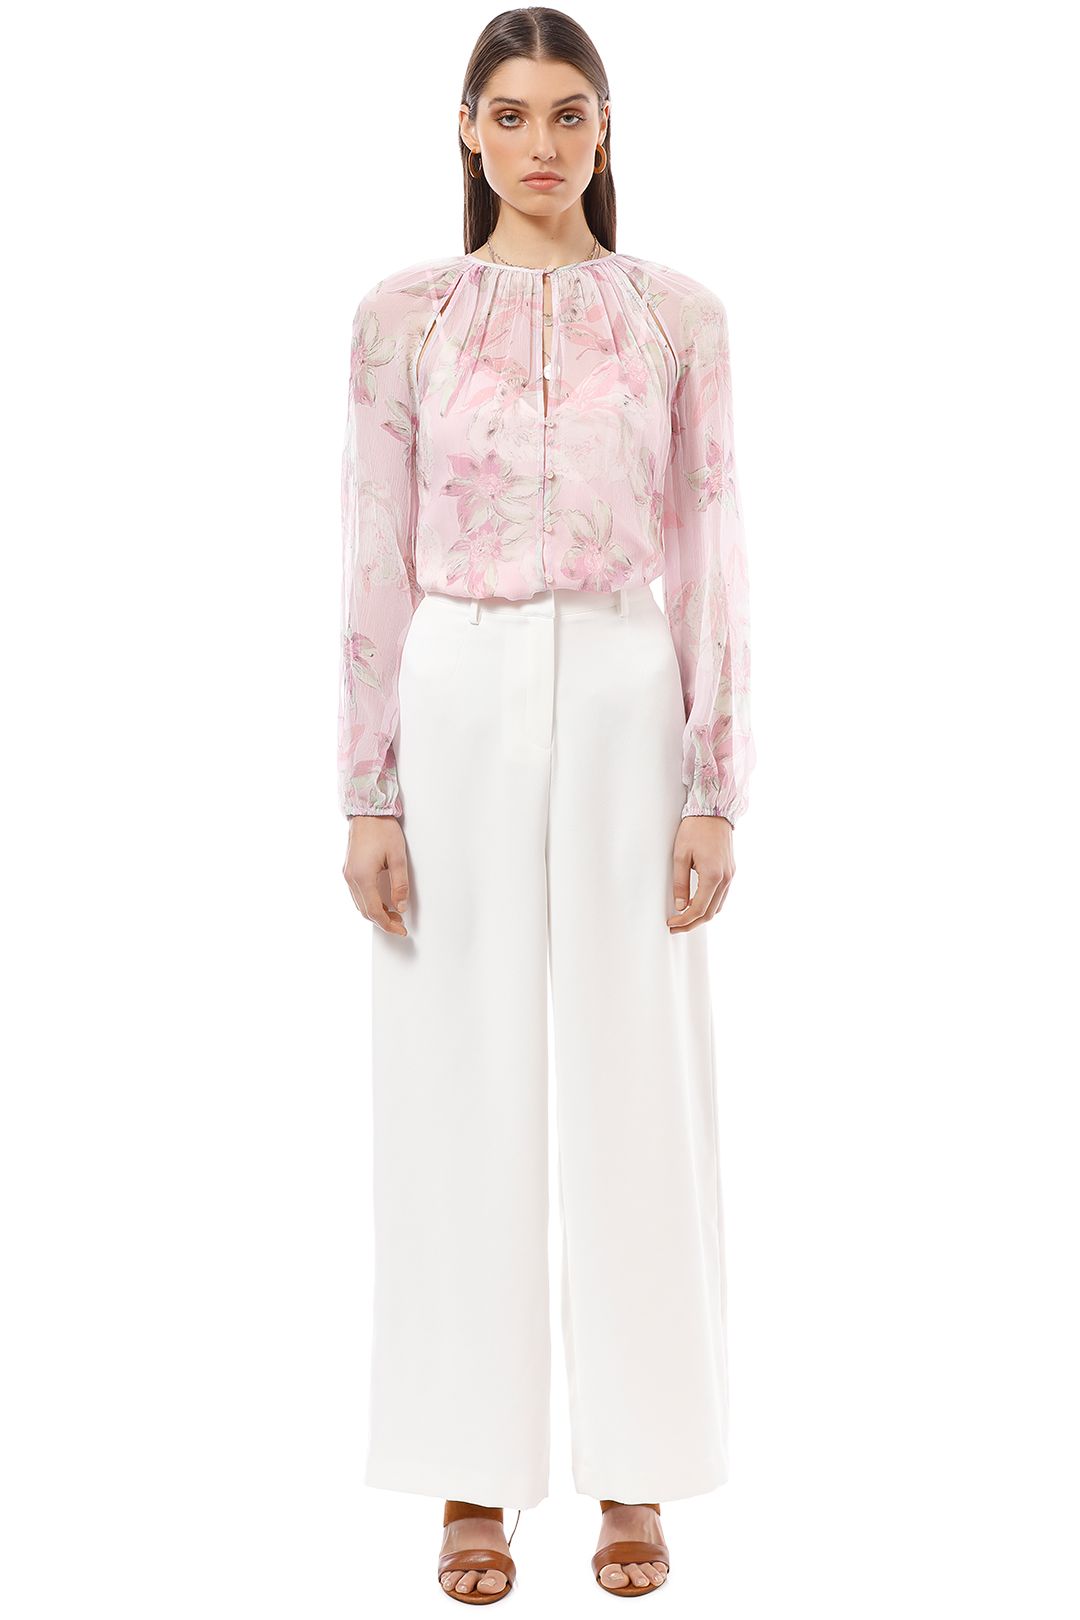 Alice McCall - Watercolour Floral Blouse - Pink Print - Front